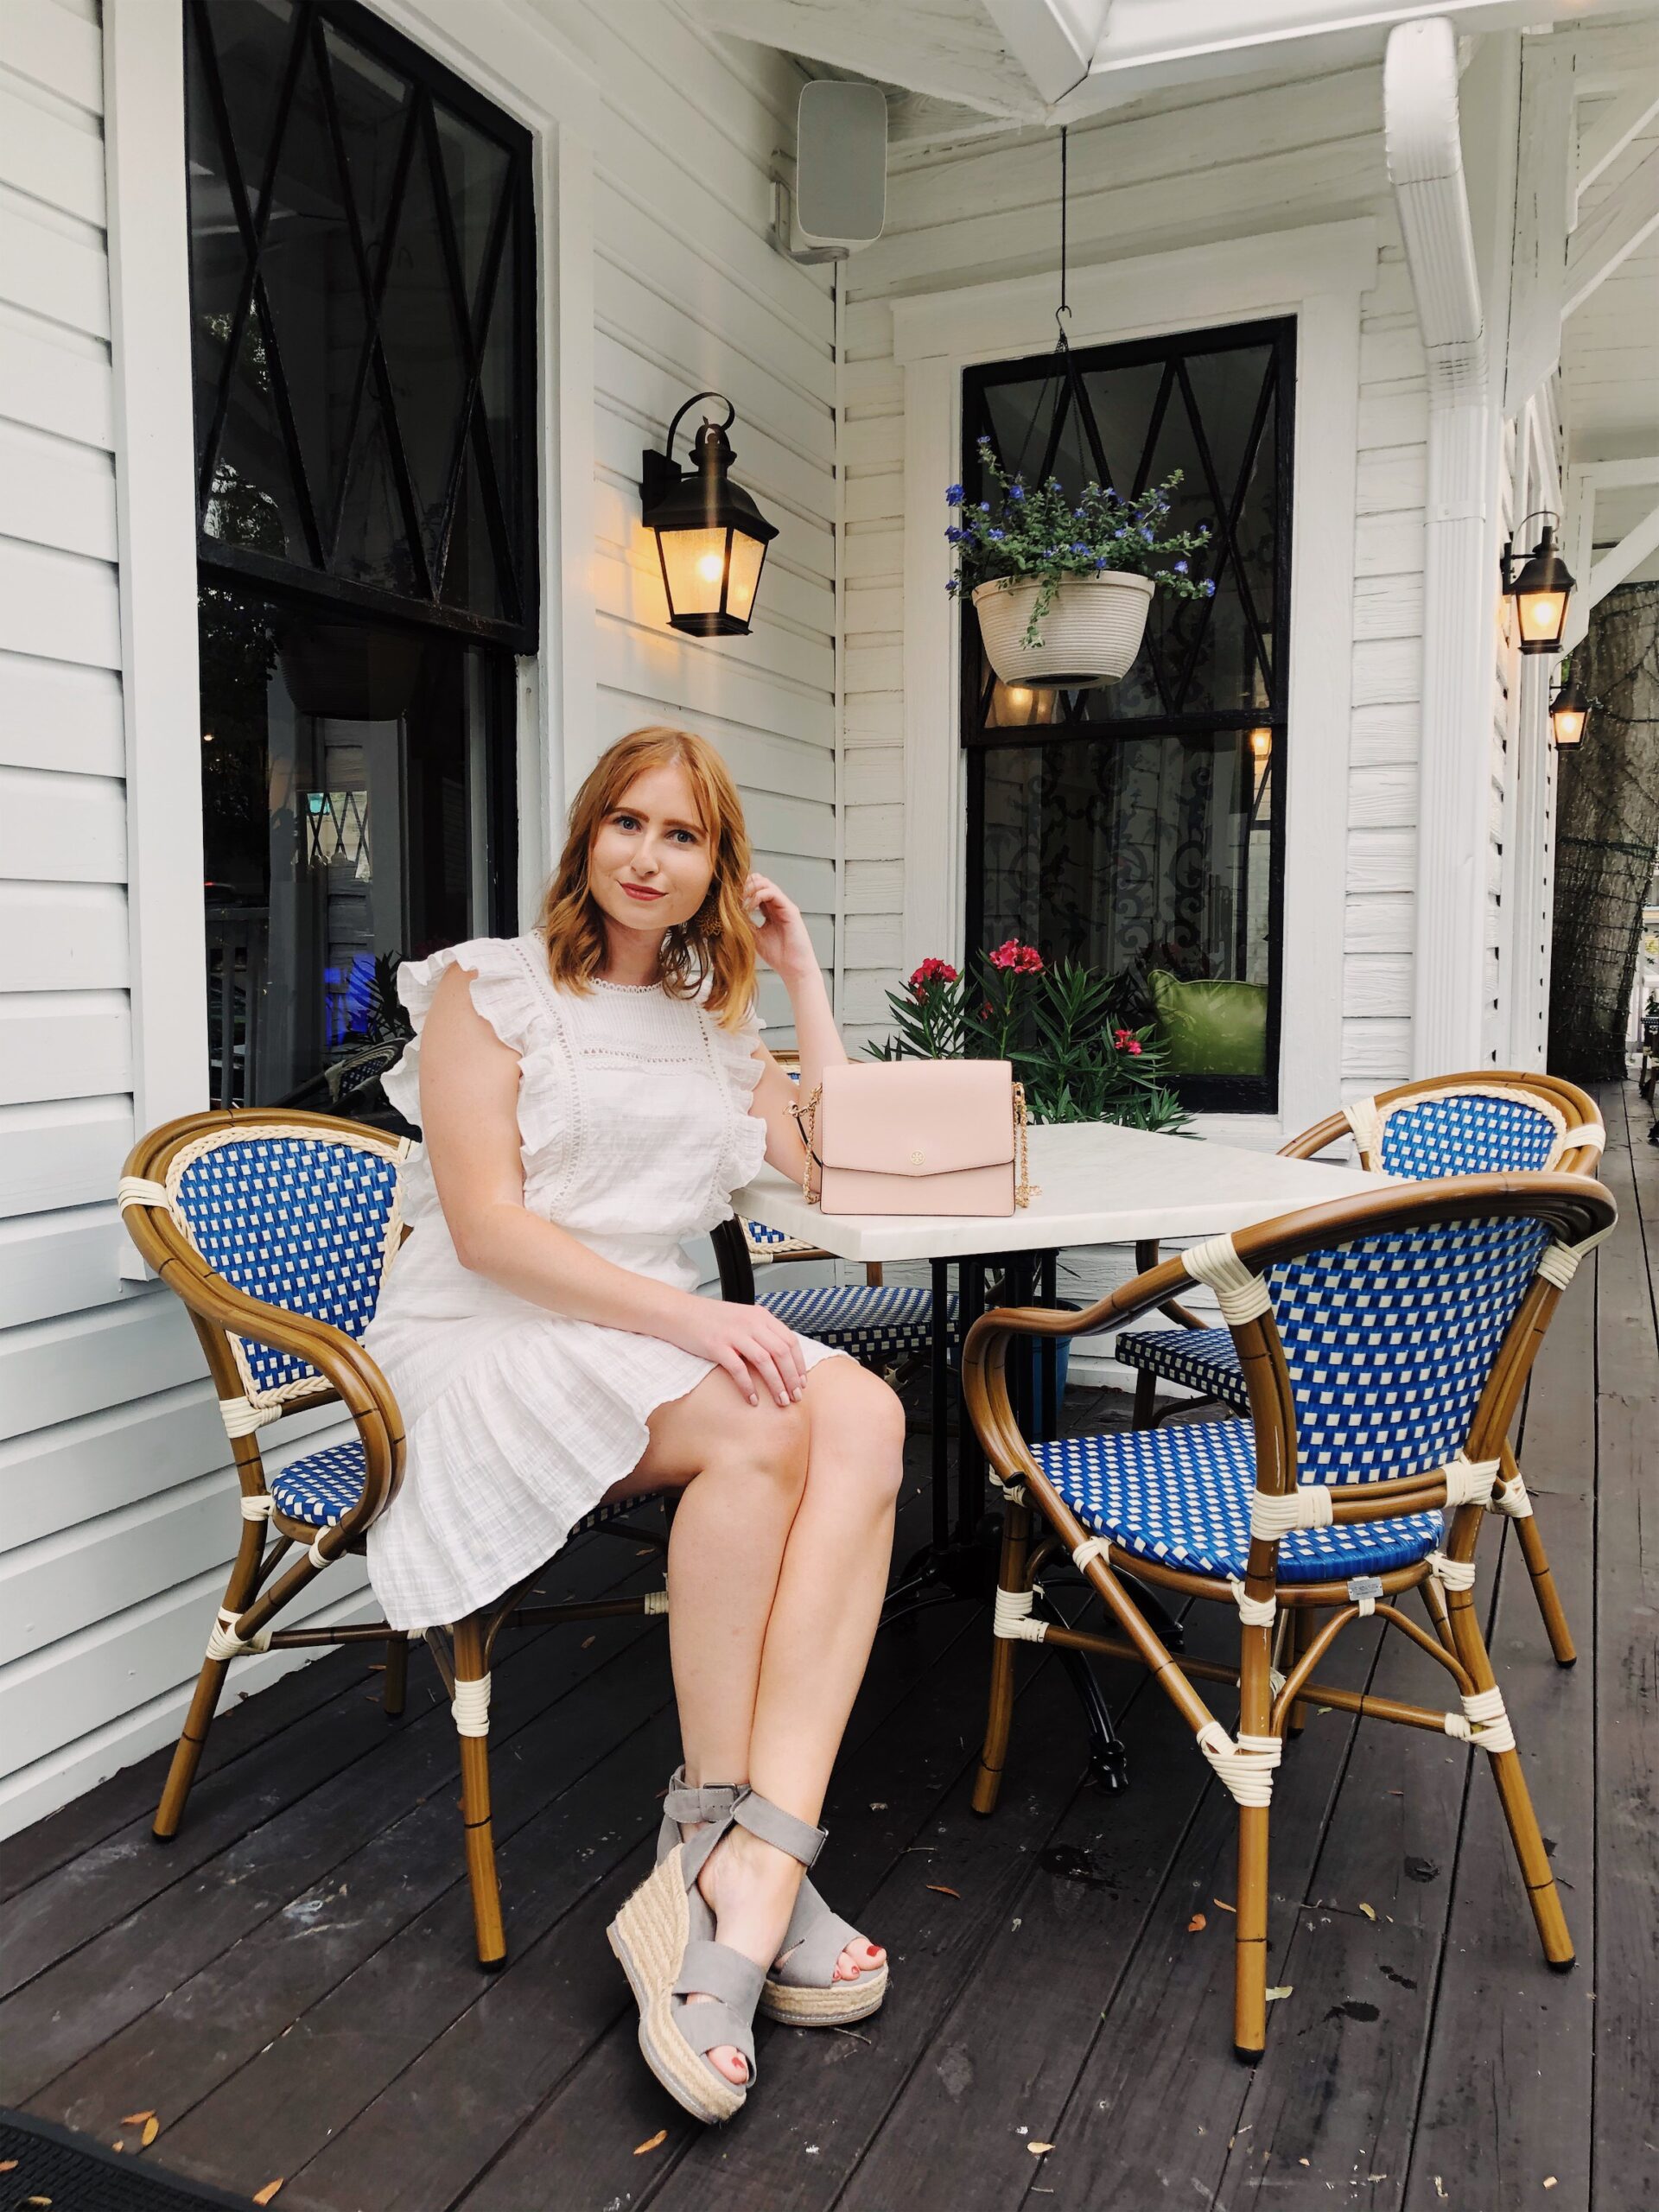 White Dresses for Women | White Dresses for Summer 2020 | Affordable by Amanda | The Left Bank Bistro